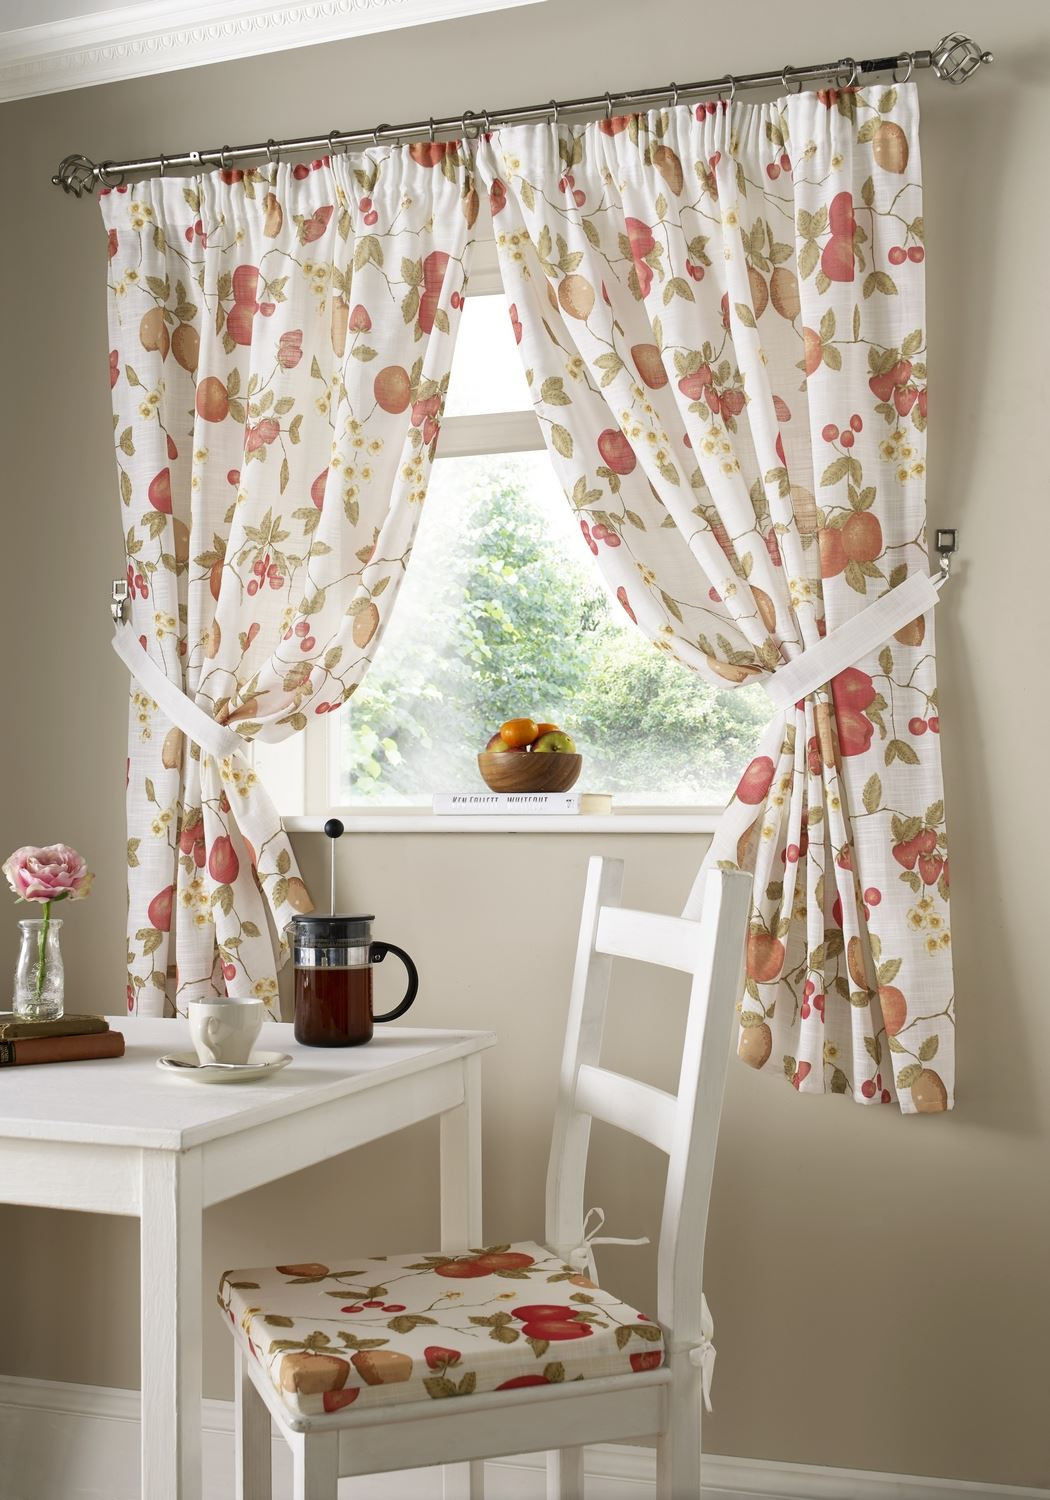 Fruit Kitchen Curtains
 Ready Made Kitchen Window Curtains Pencil Pleat Tie Backs